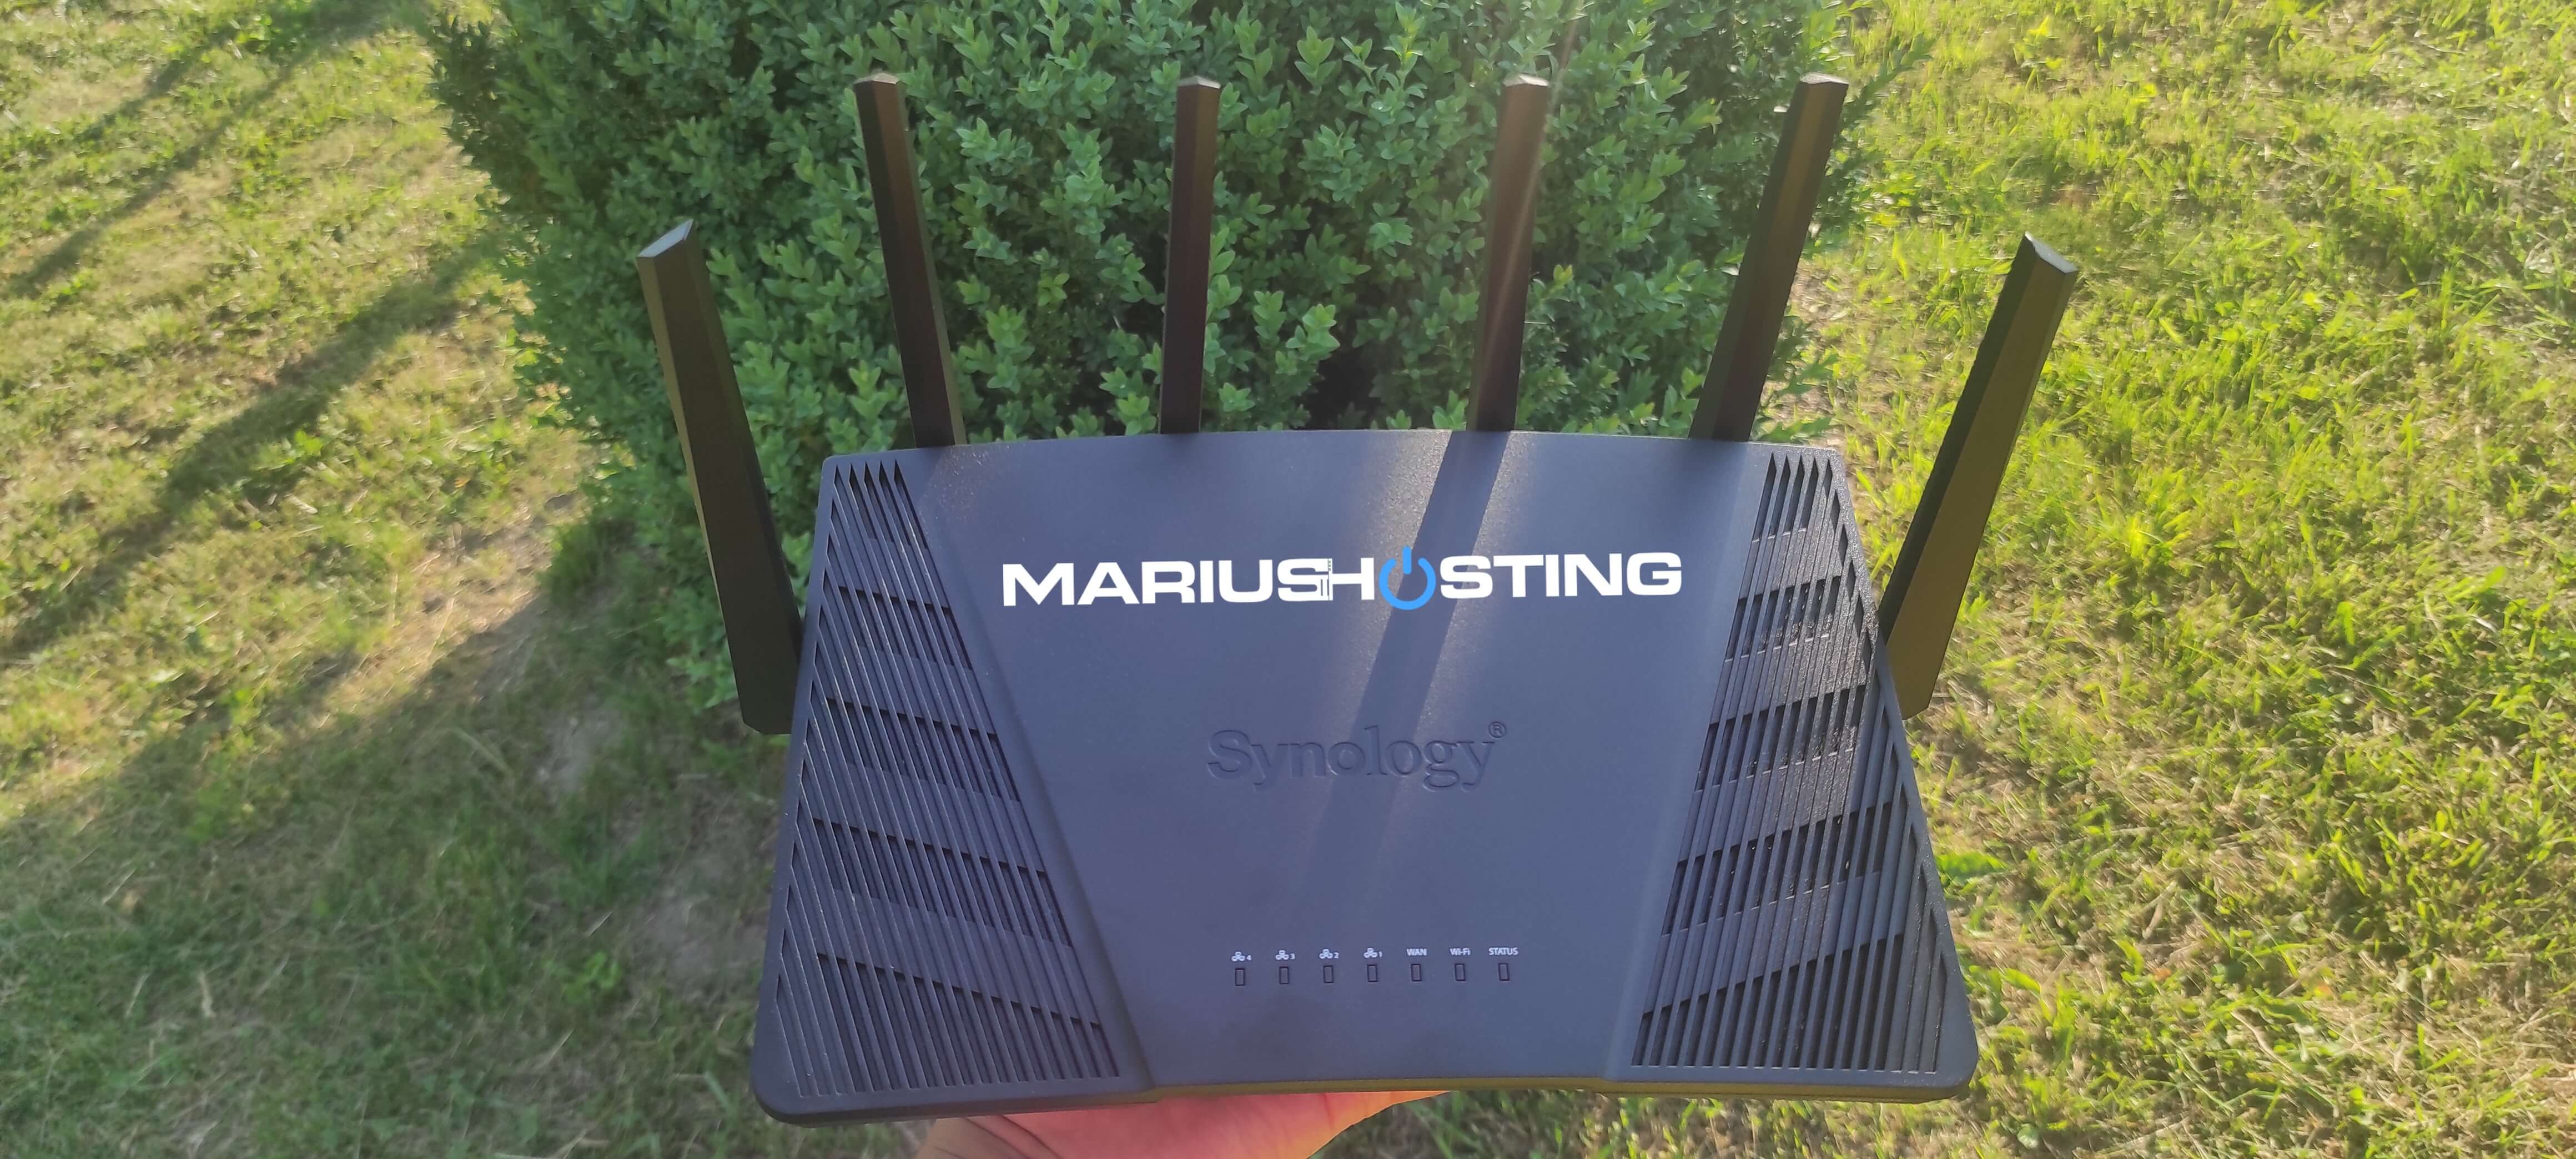 Synology RT6600ax mariushosting review 3